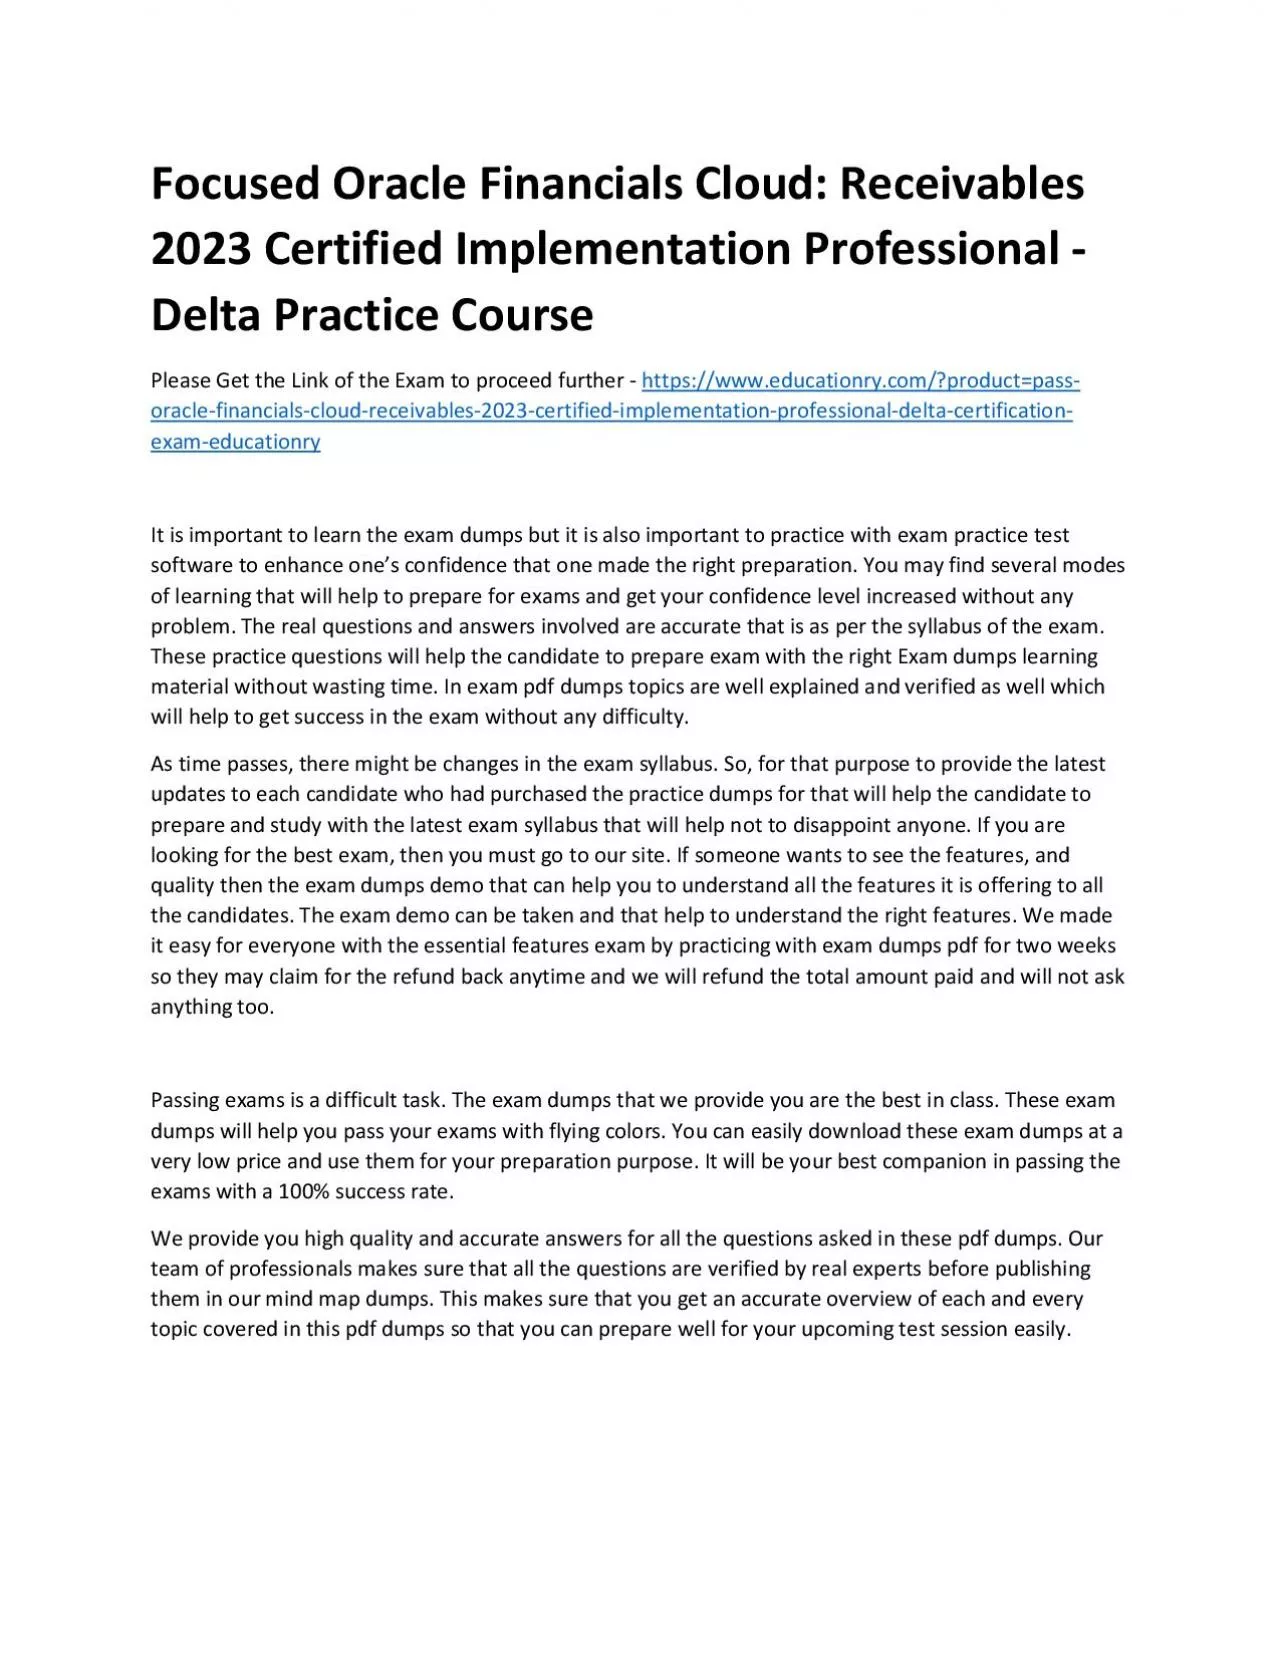 Focused Oracle Financials Cloud: Receivables 2023 Certified Implementation Professional